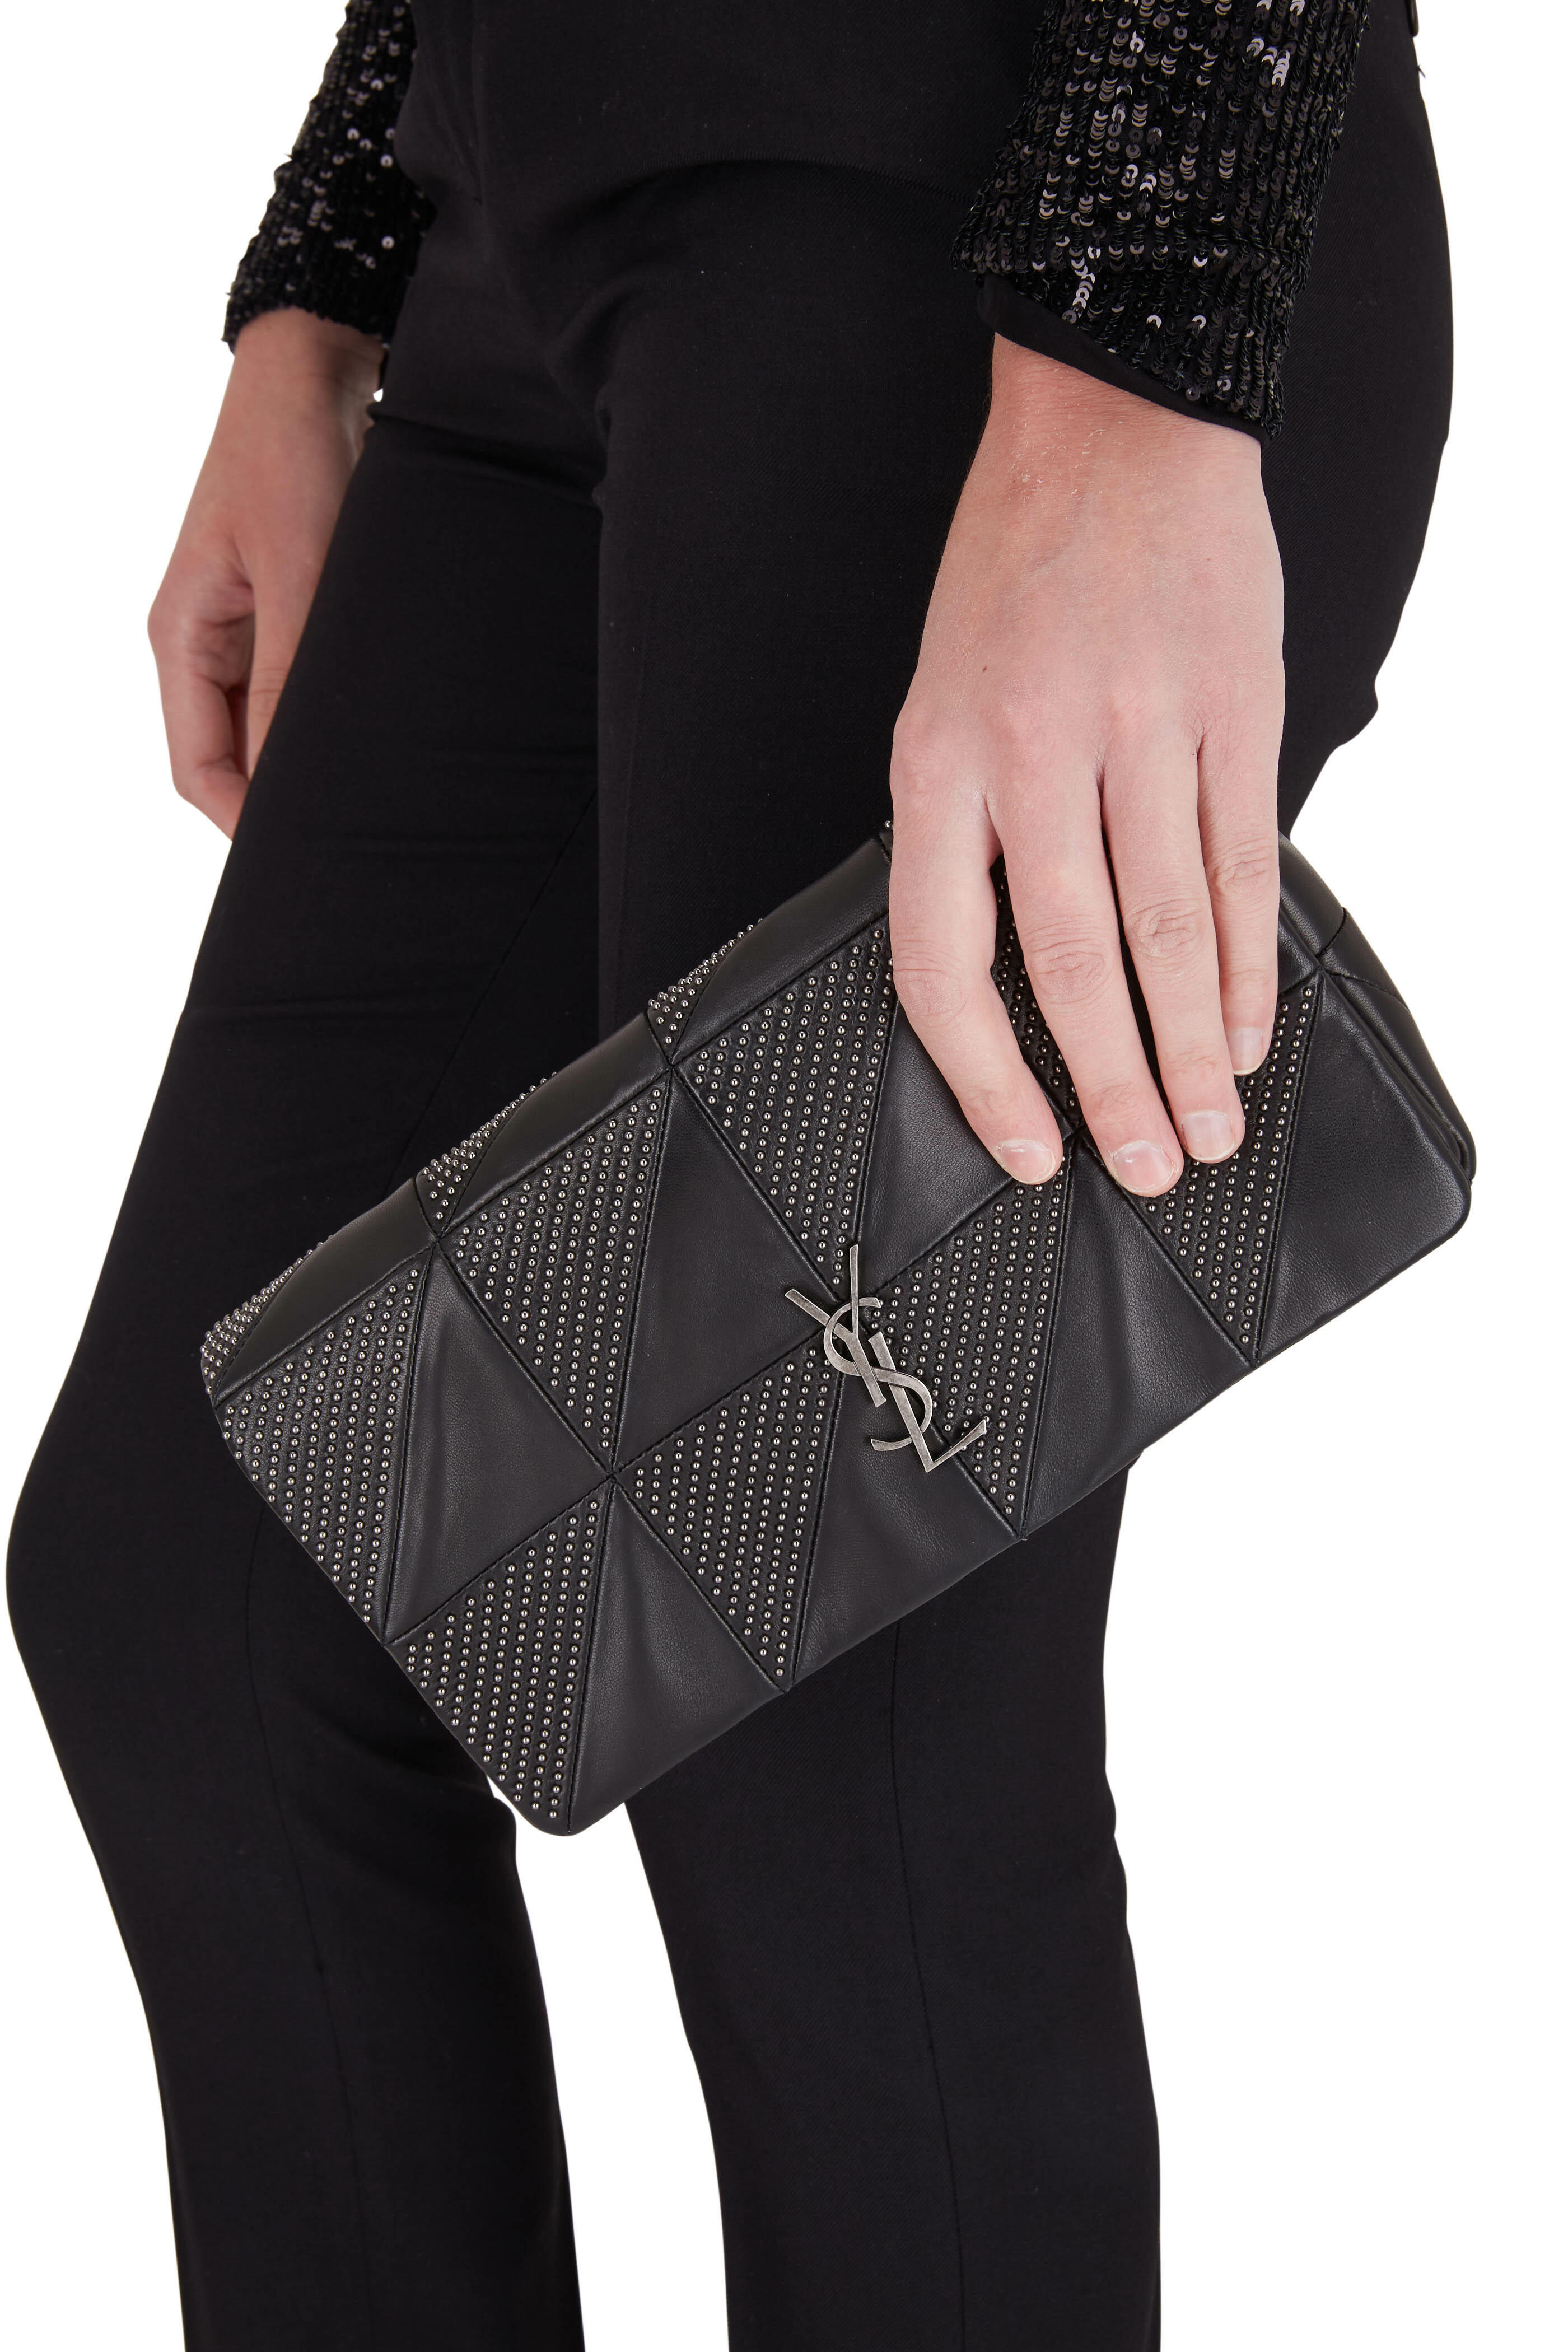 KATE 99 IN QUILTED NAPPA LEATHER, Saint Laurent